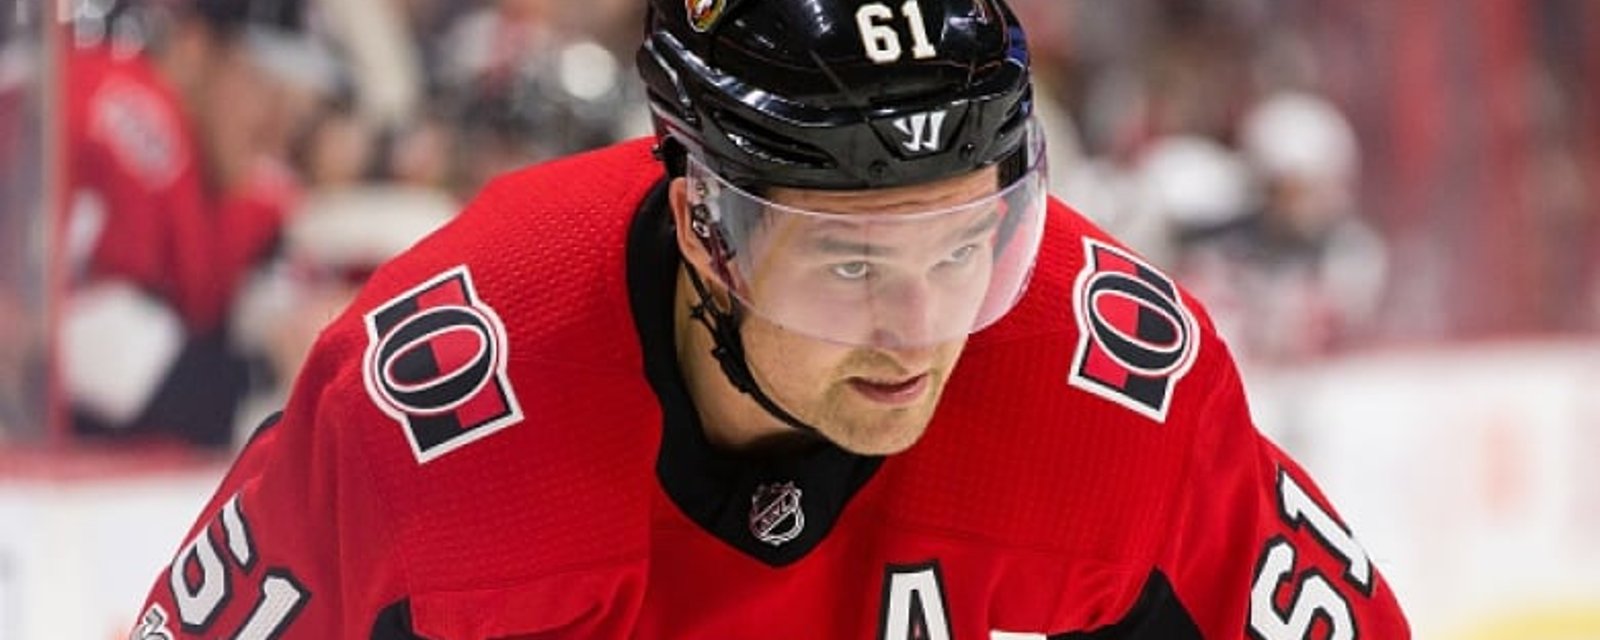 Stone ready to negotiate new contract but rival team looks to pry him out of Ottawa 